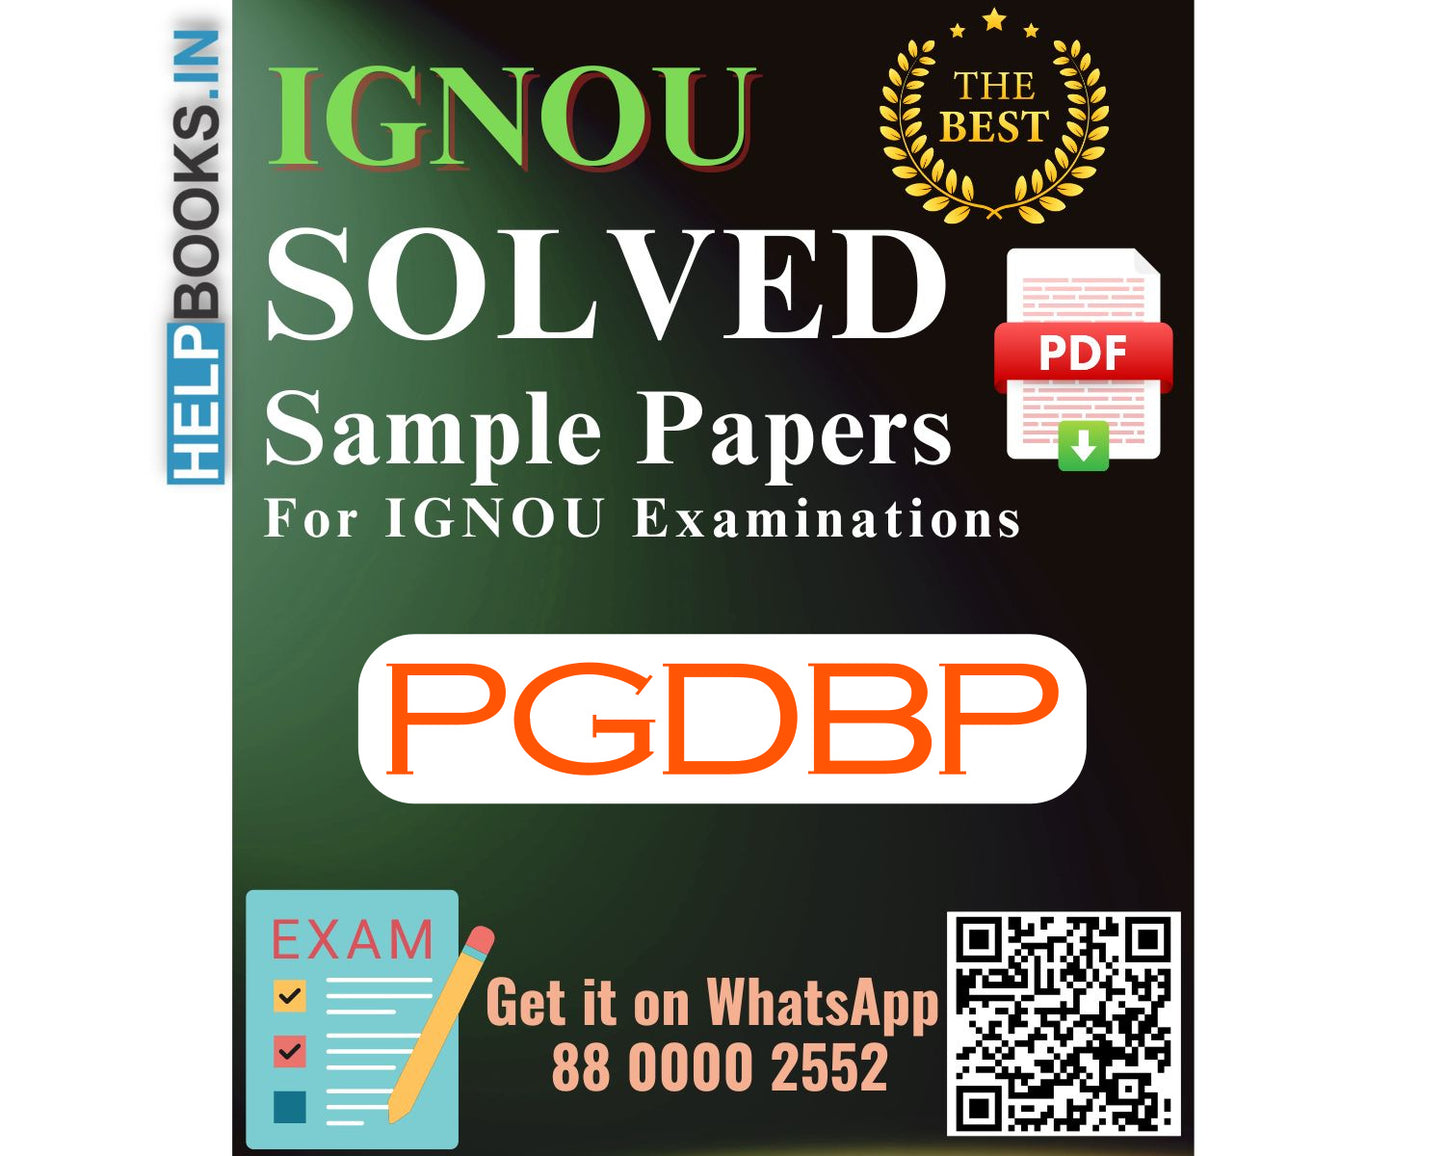 IGNOU Post Graduate Diploma in Book Publishing (PGDBP) | Solved Sample Papers for Exams